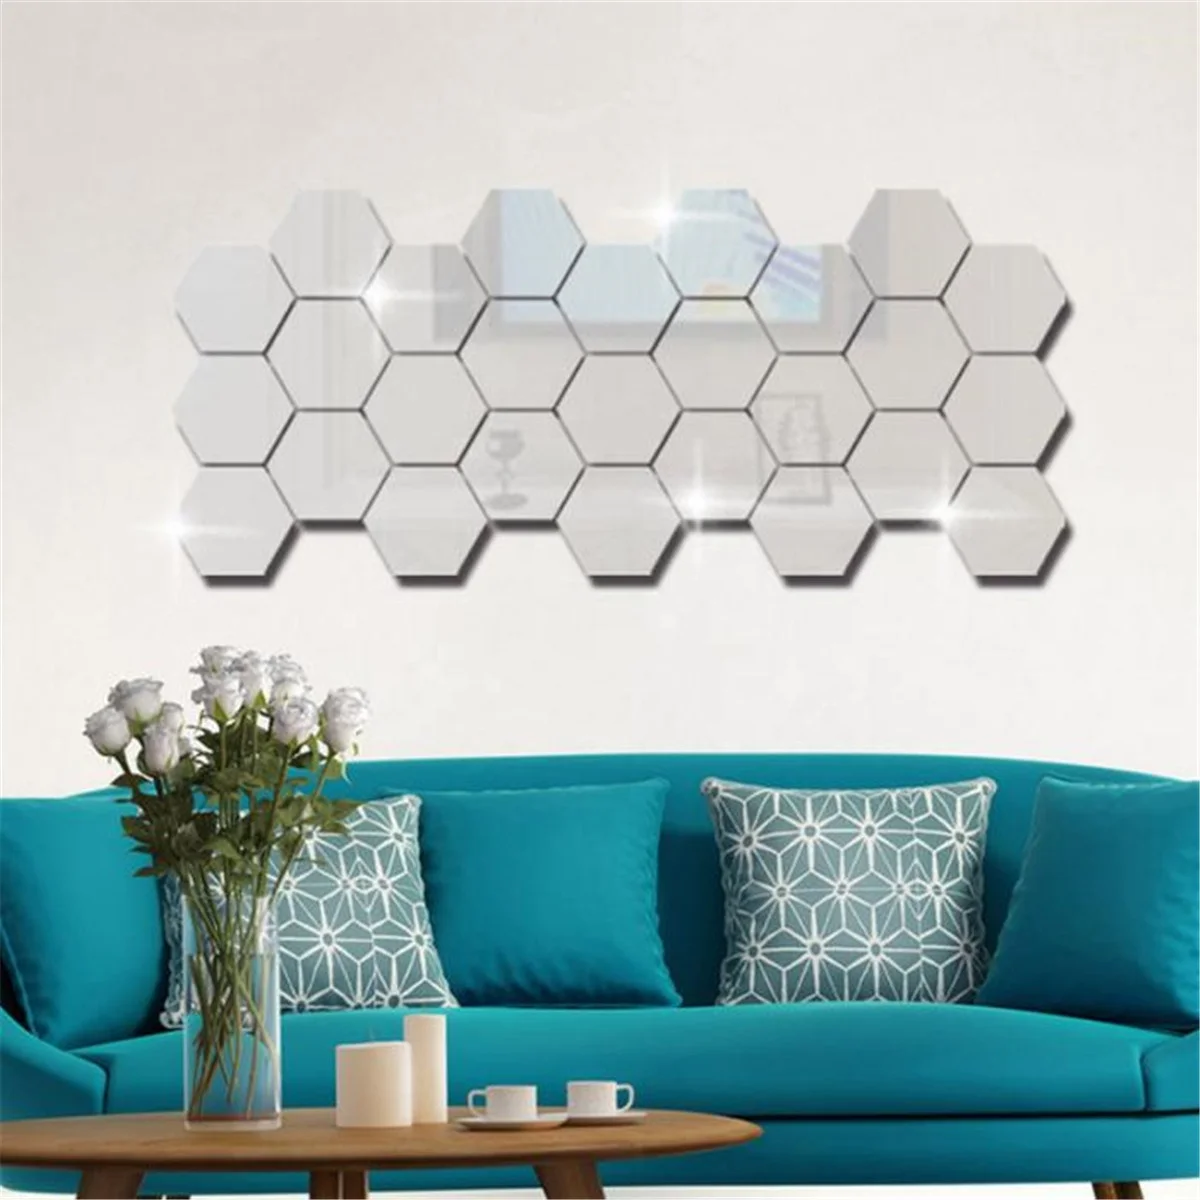 

12Pcs 3D Mirror Wall Sticker Home Decor Hexagon Decorations DIY Removable Living-Room Decal Art Ornaments For Home